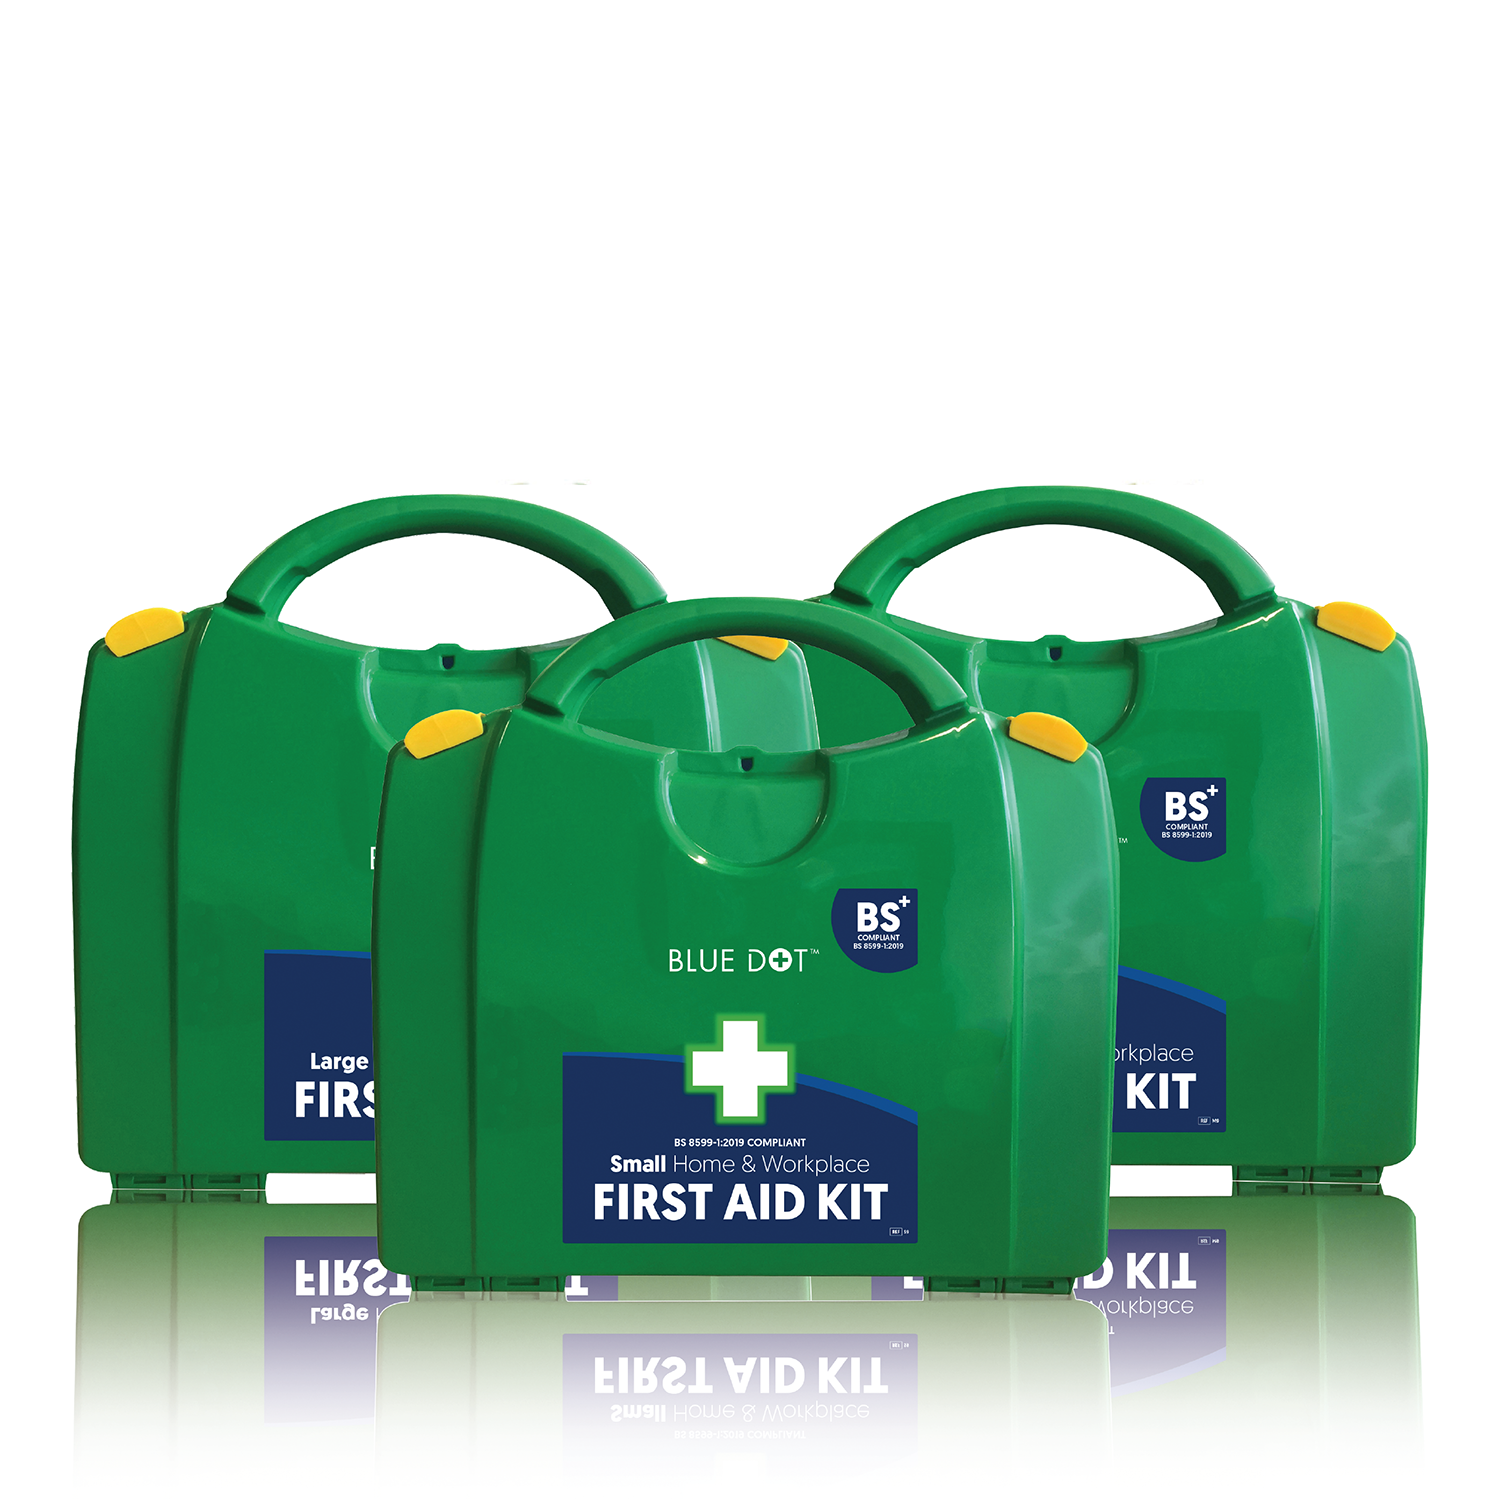 Blue Dot Home & Workplace First Aid Kit BS 8599-1 (2019) | Smaill | Single